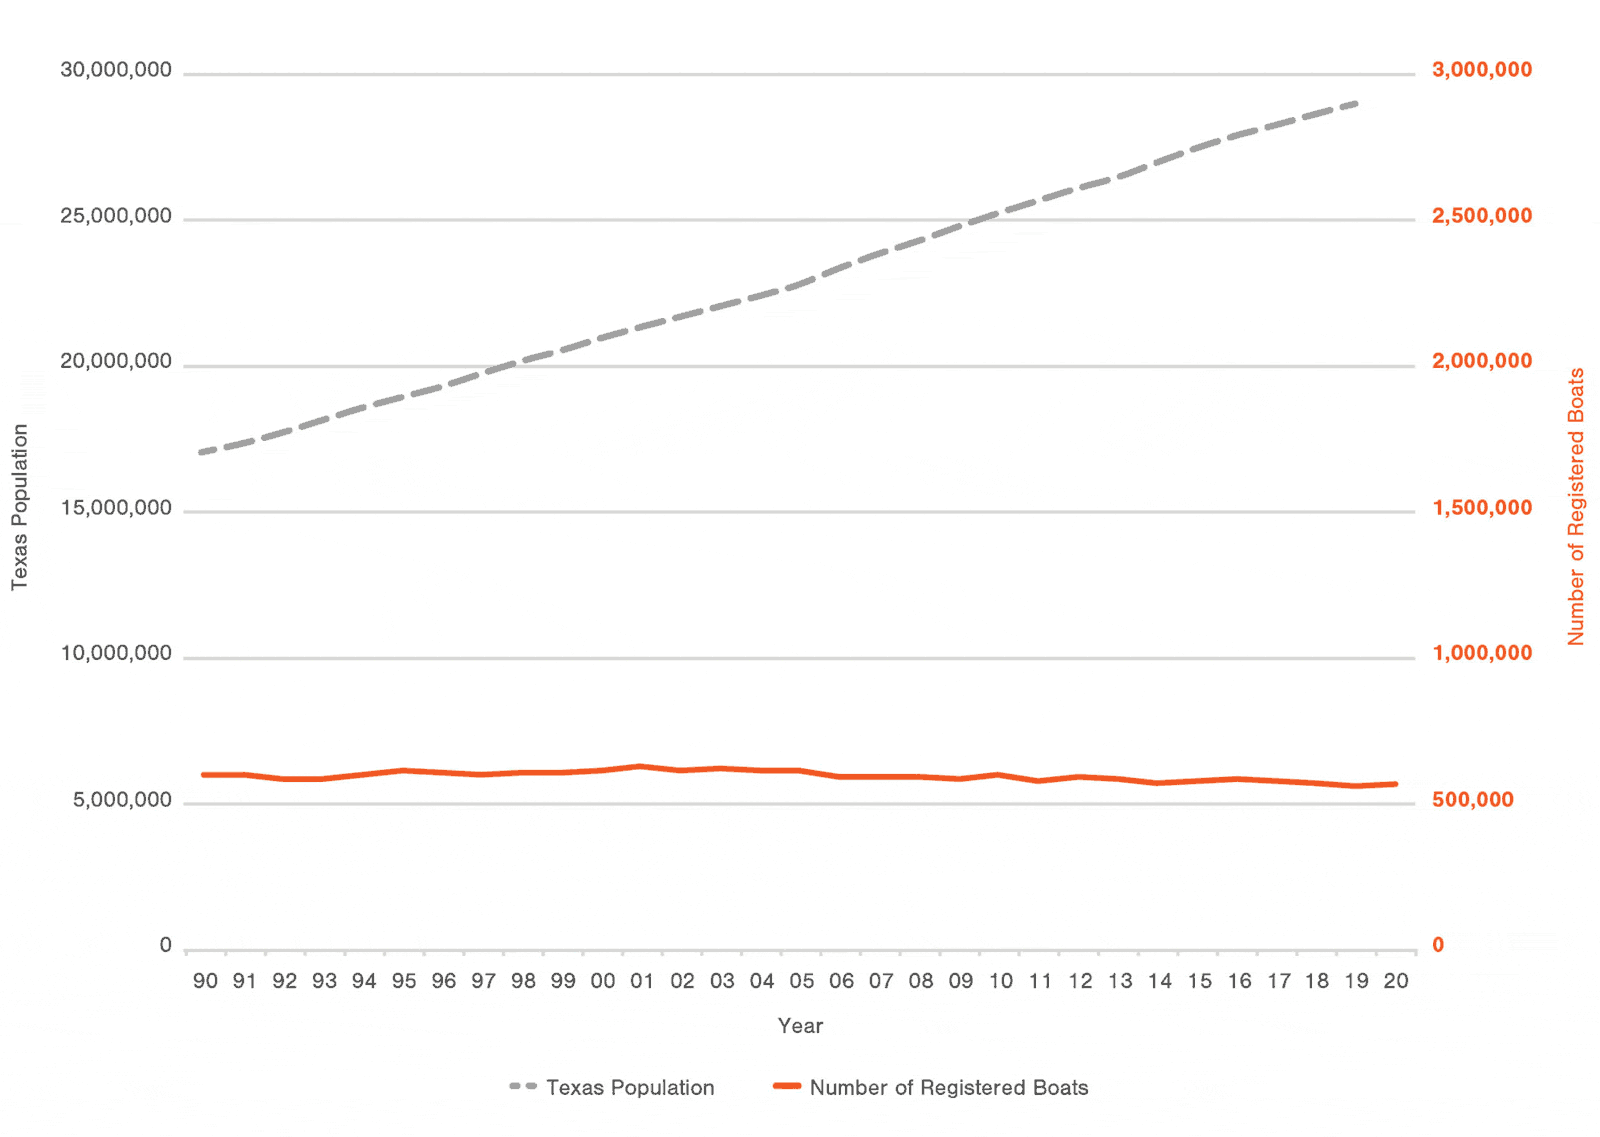 Line graph comparison of Texas population to number of registered boats. Population grows from 17 million to 29 million while number of registered boaters stays at just over 500 thousand from 1990 to 2020.